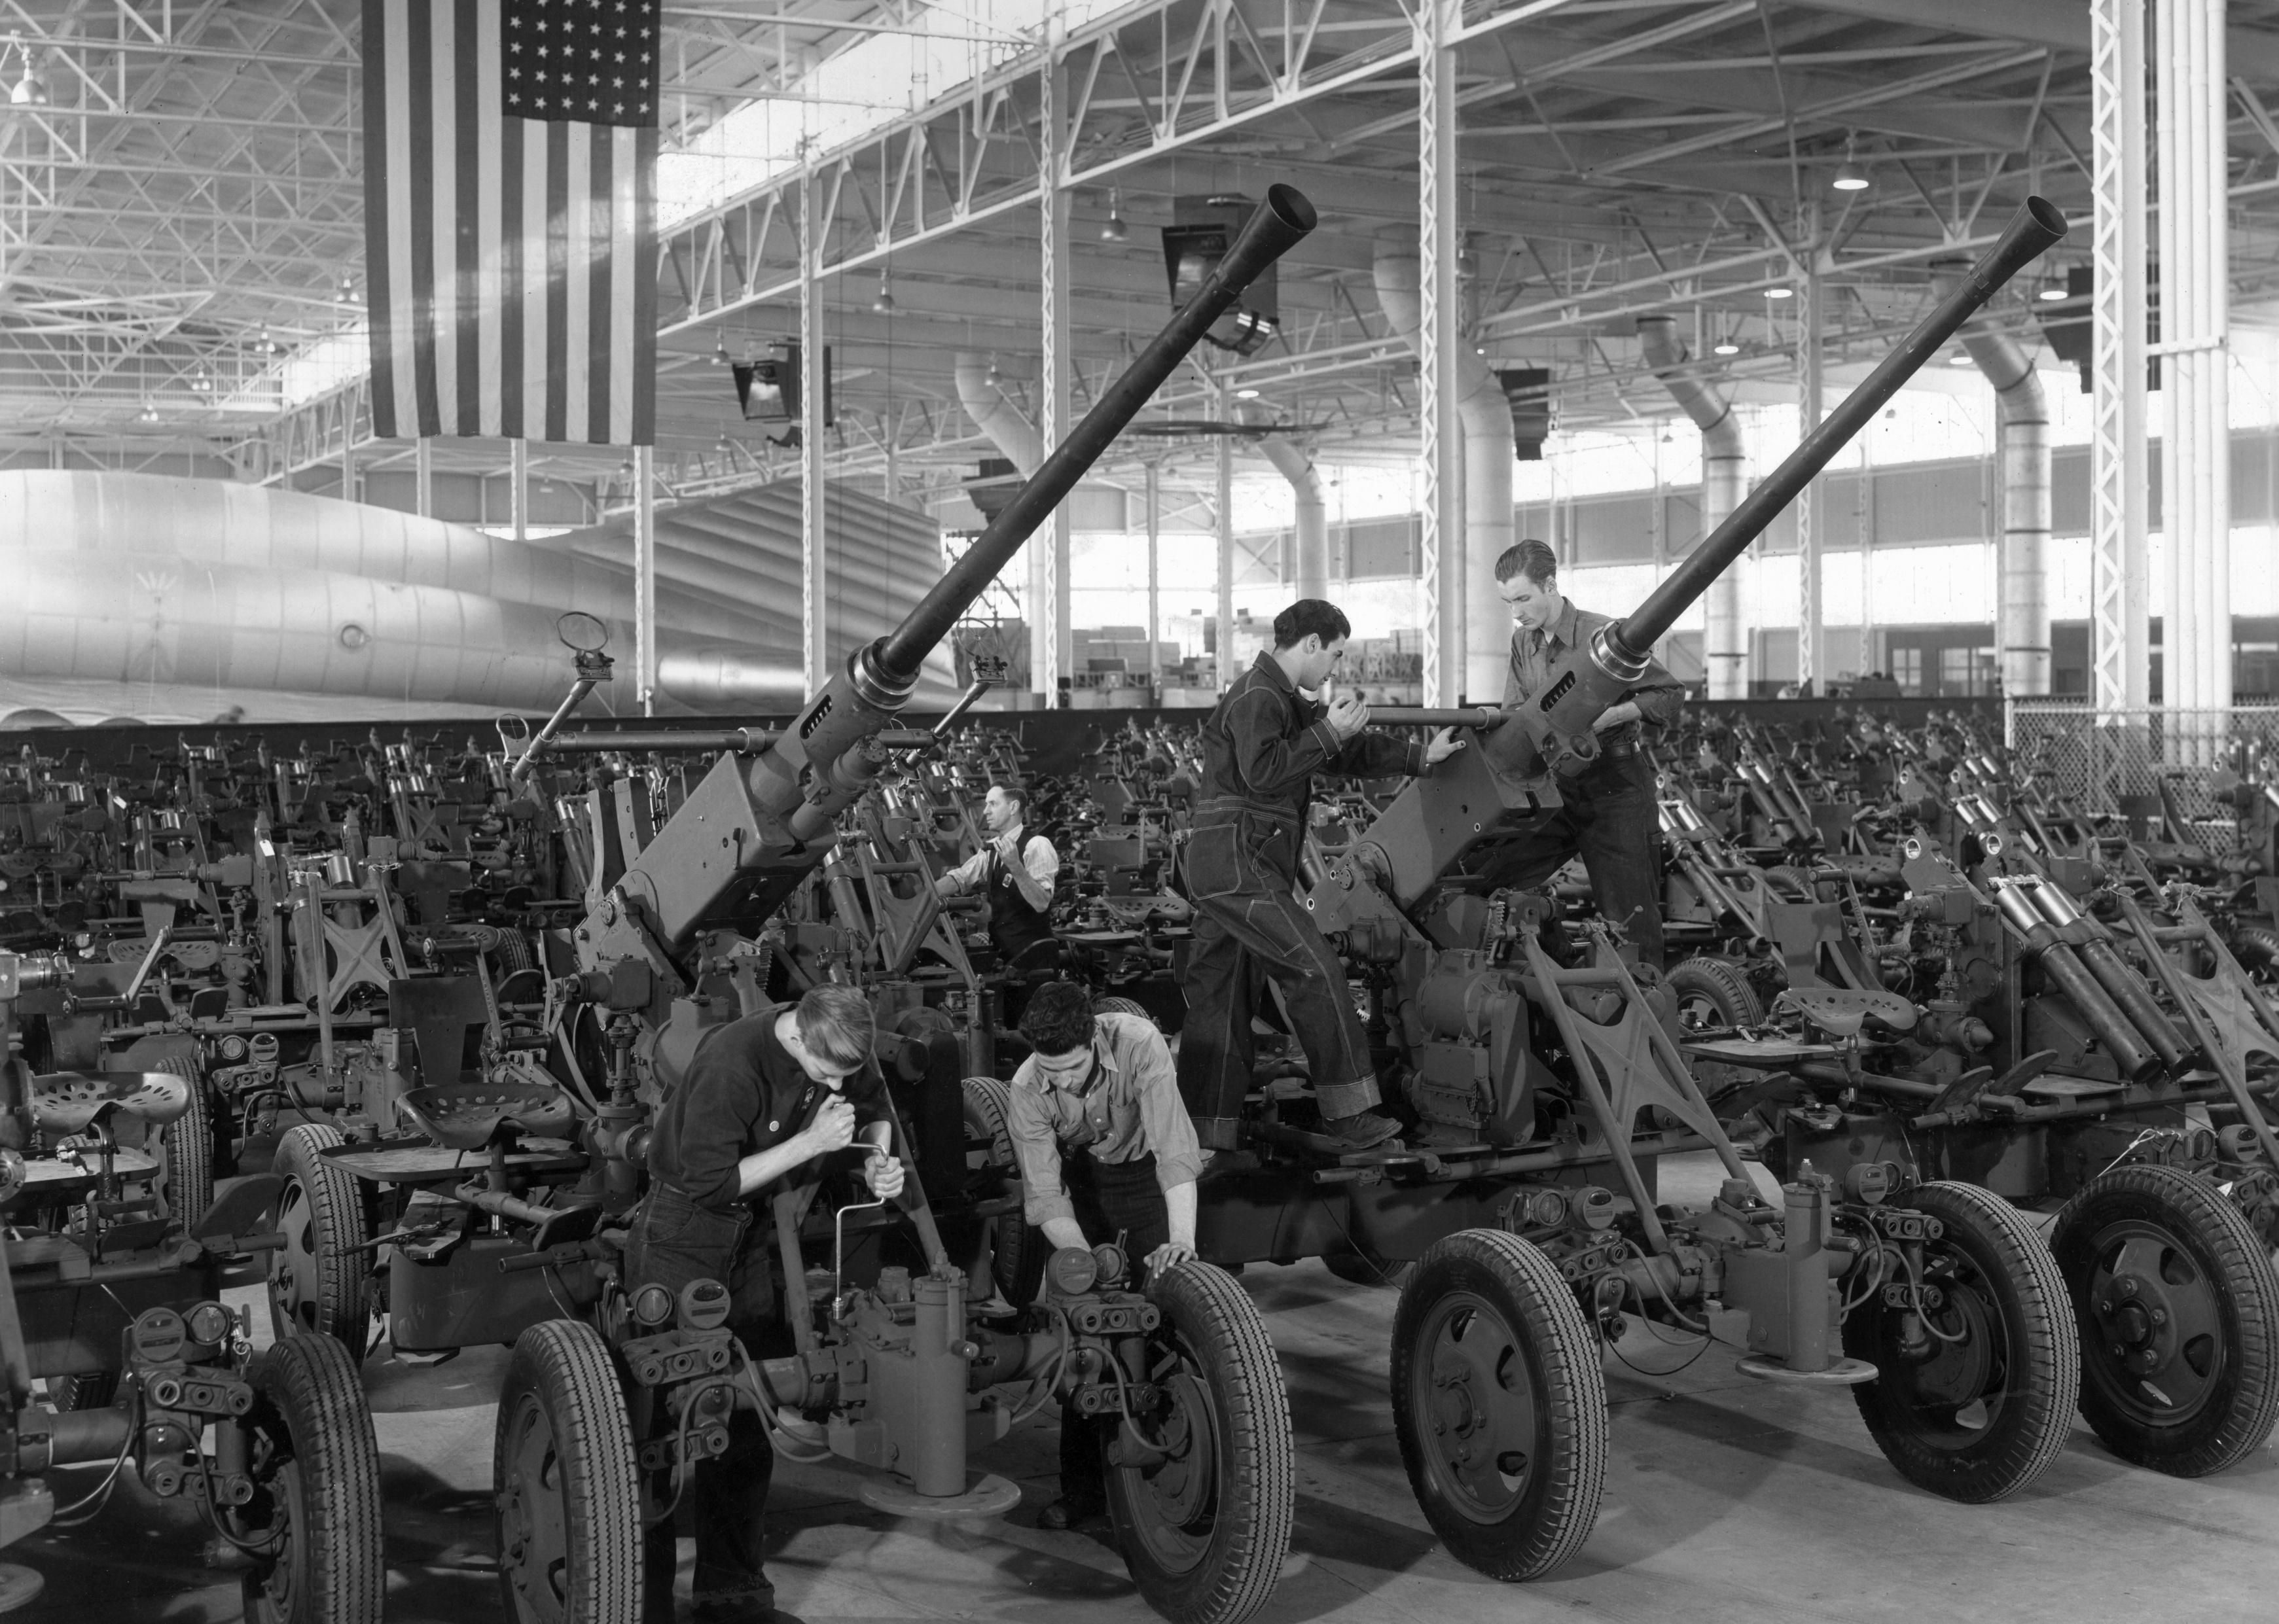 A full-length view of young male workers wearing uniforms, assembling 40 millimeter anti-aircraft guns.